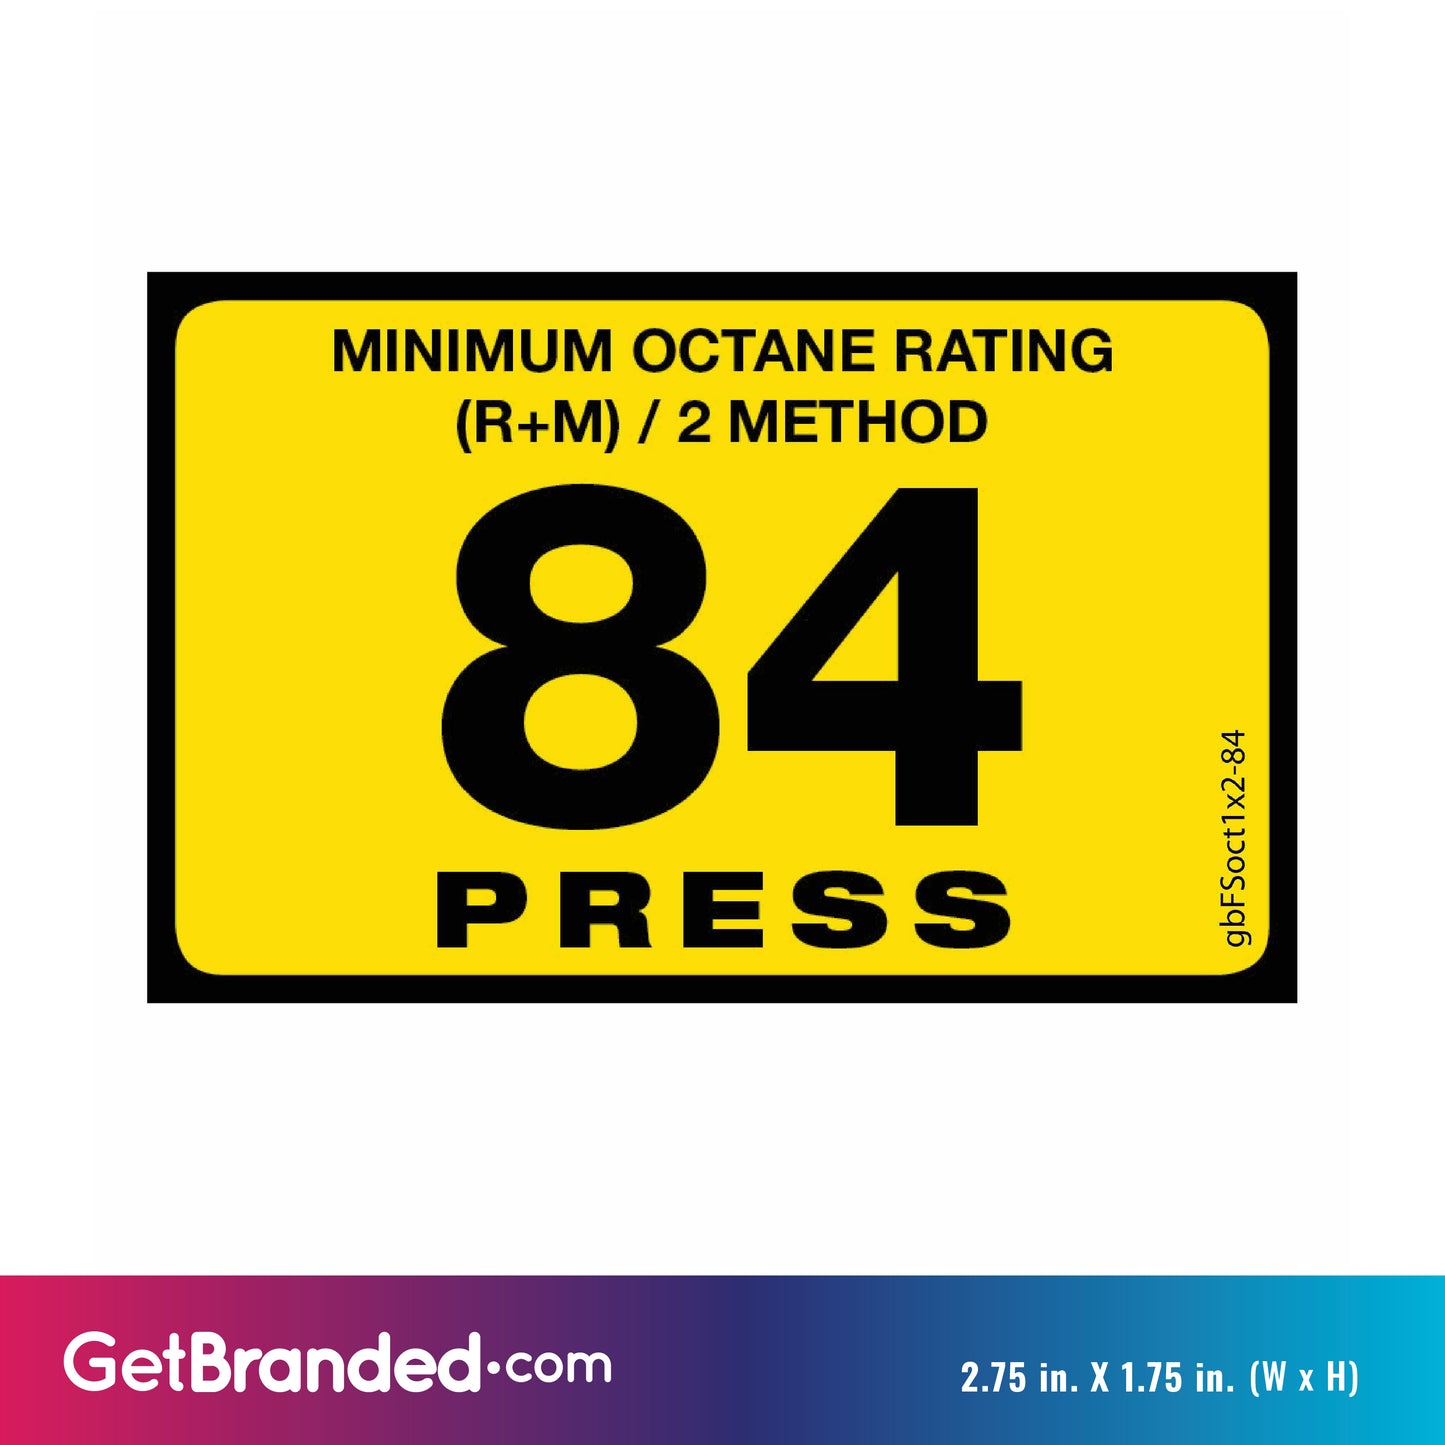 84 Press Octane Rating Decal. 1 inch by 2 inches size guide.